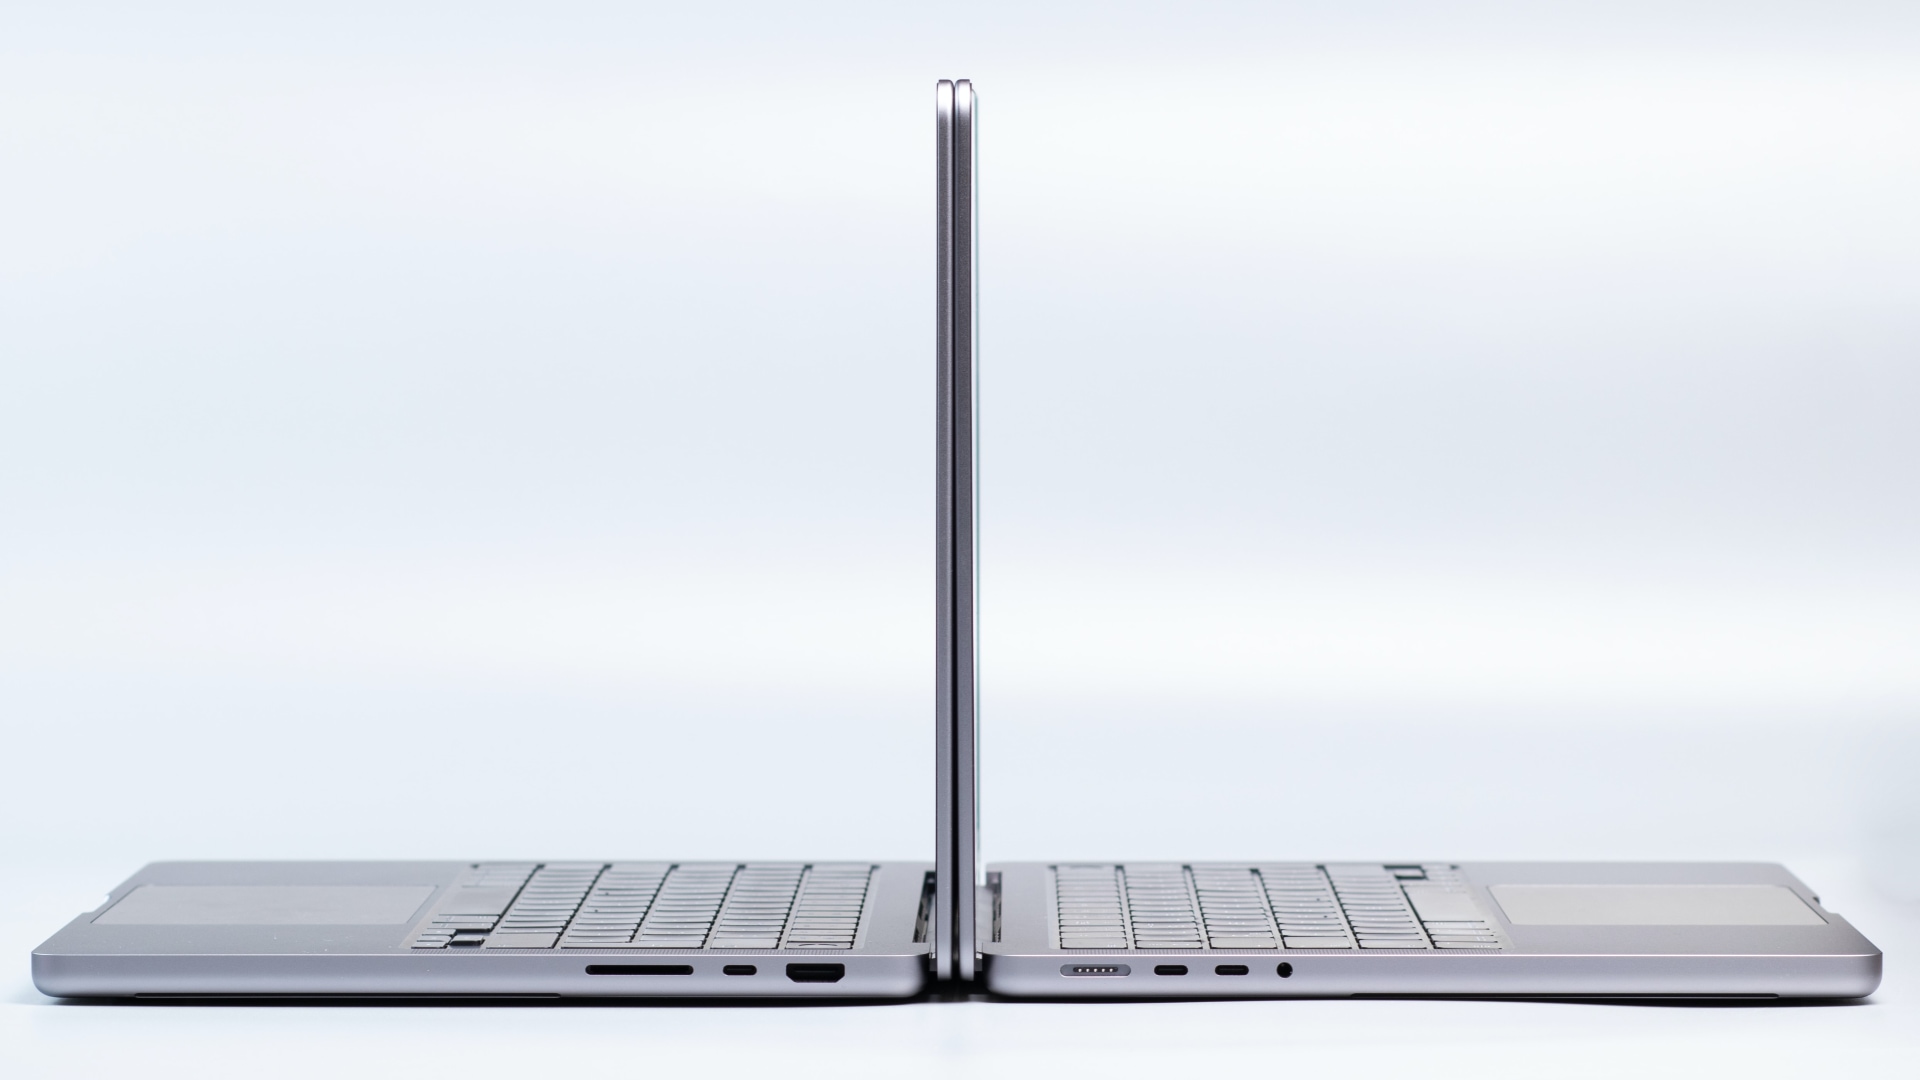 Two MacBook Pro laptops side by side, with their lids open